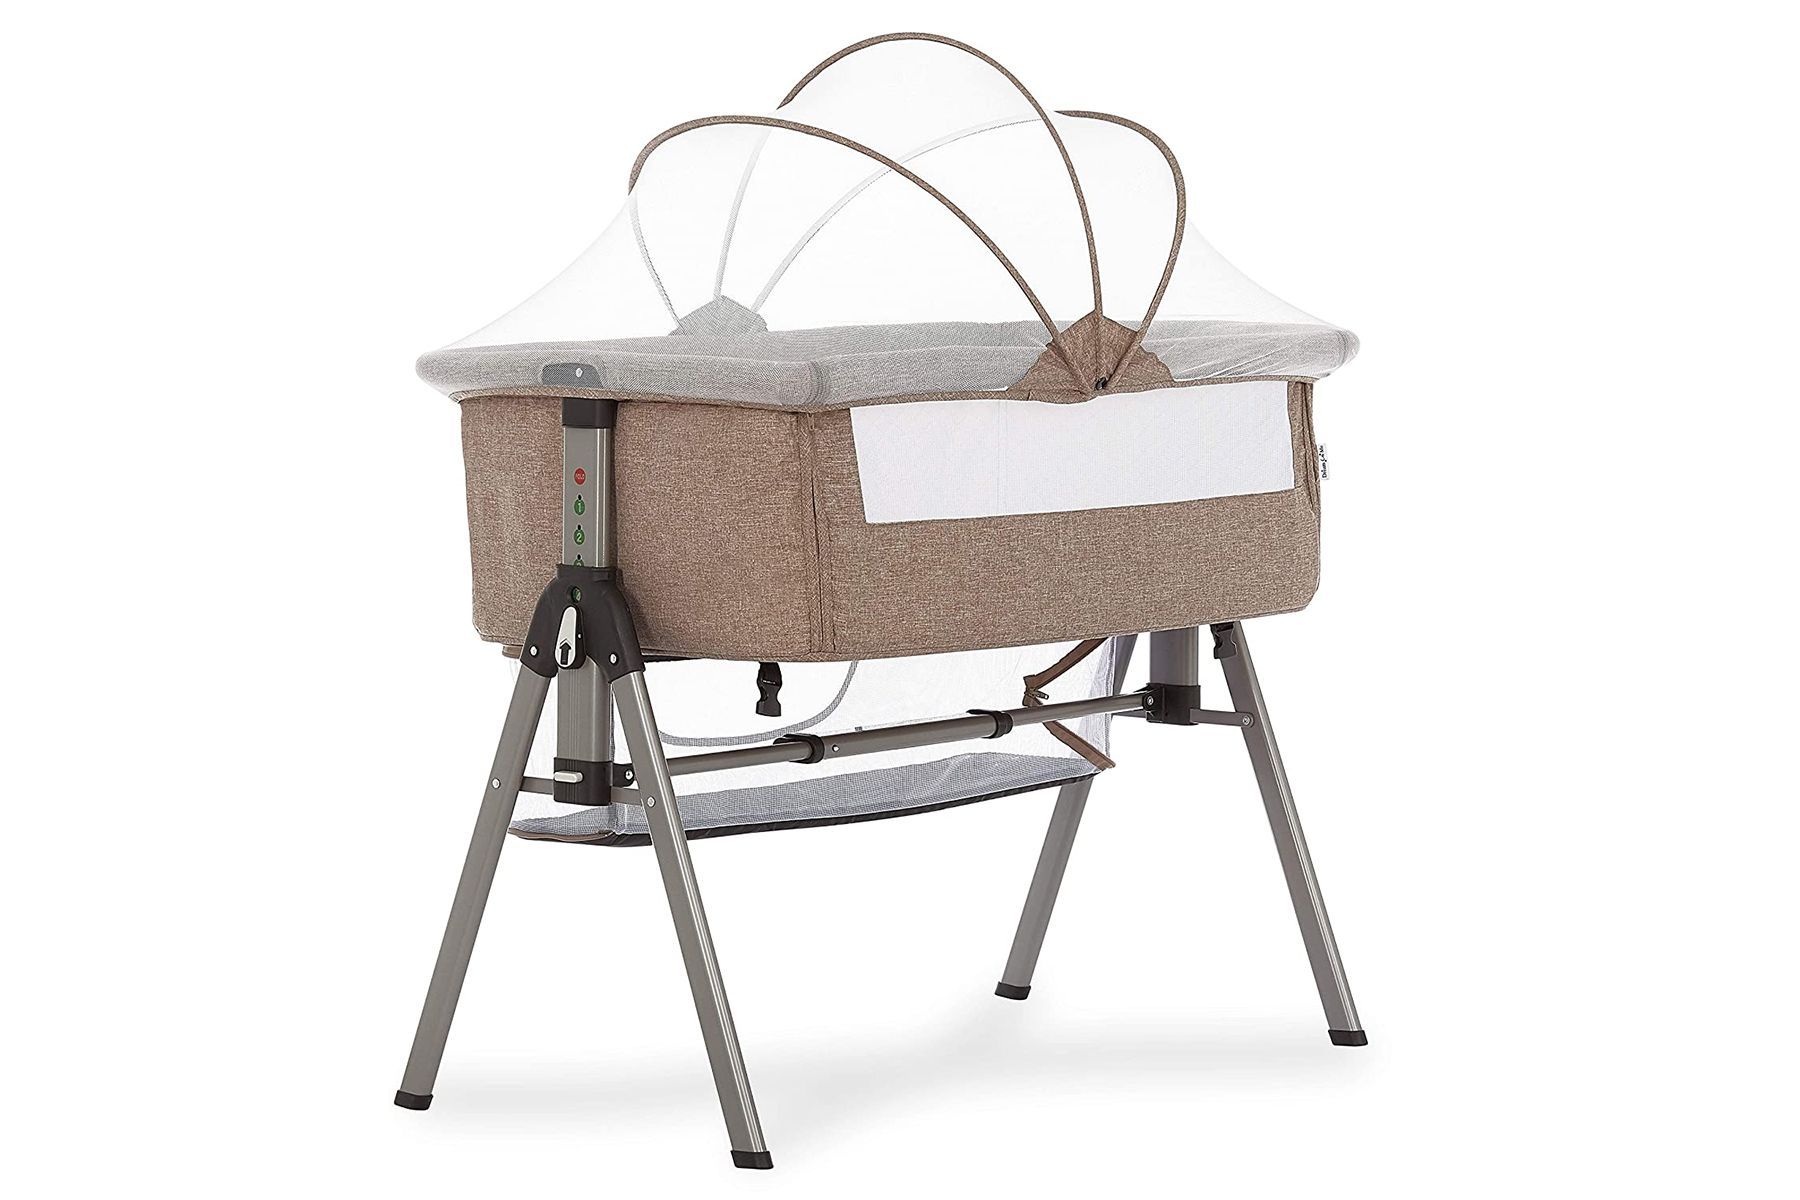 Mattress Mosquito .Next to Me Comfortable Sleep Baby Crib Bedside Cot Bed 